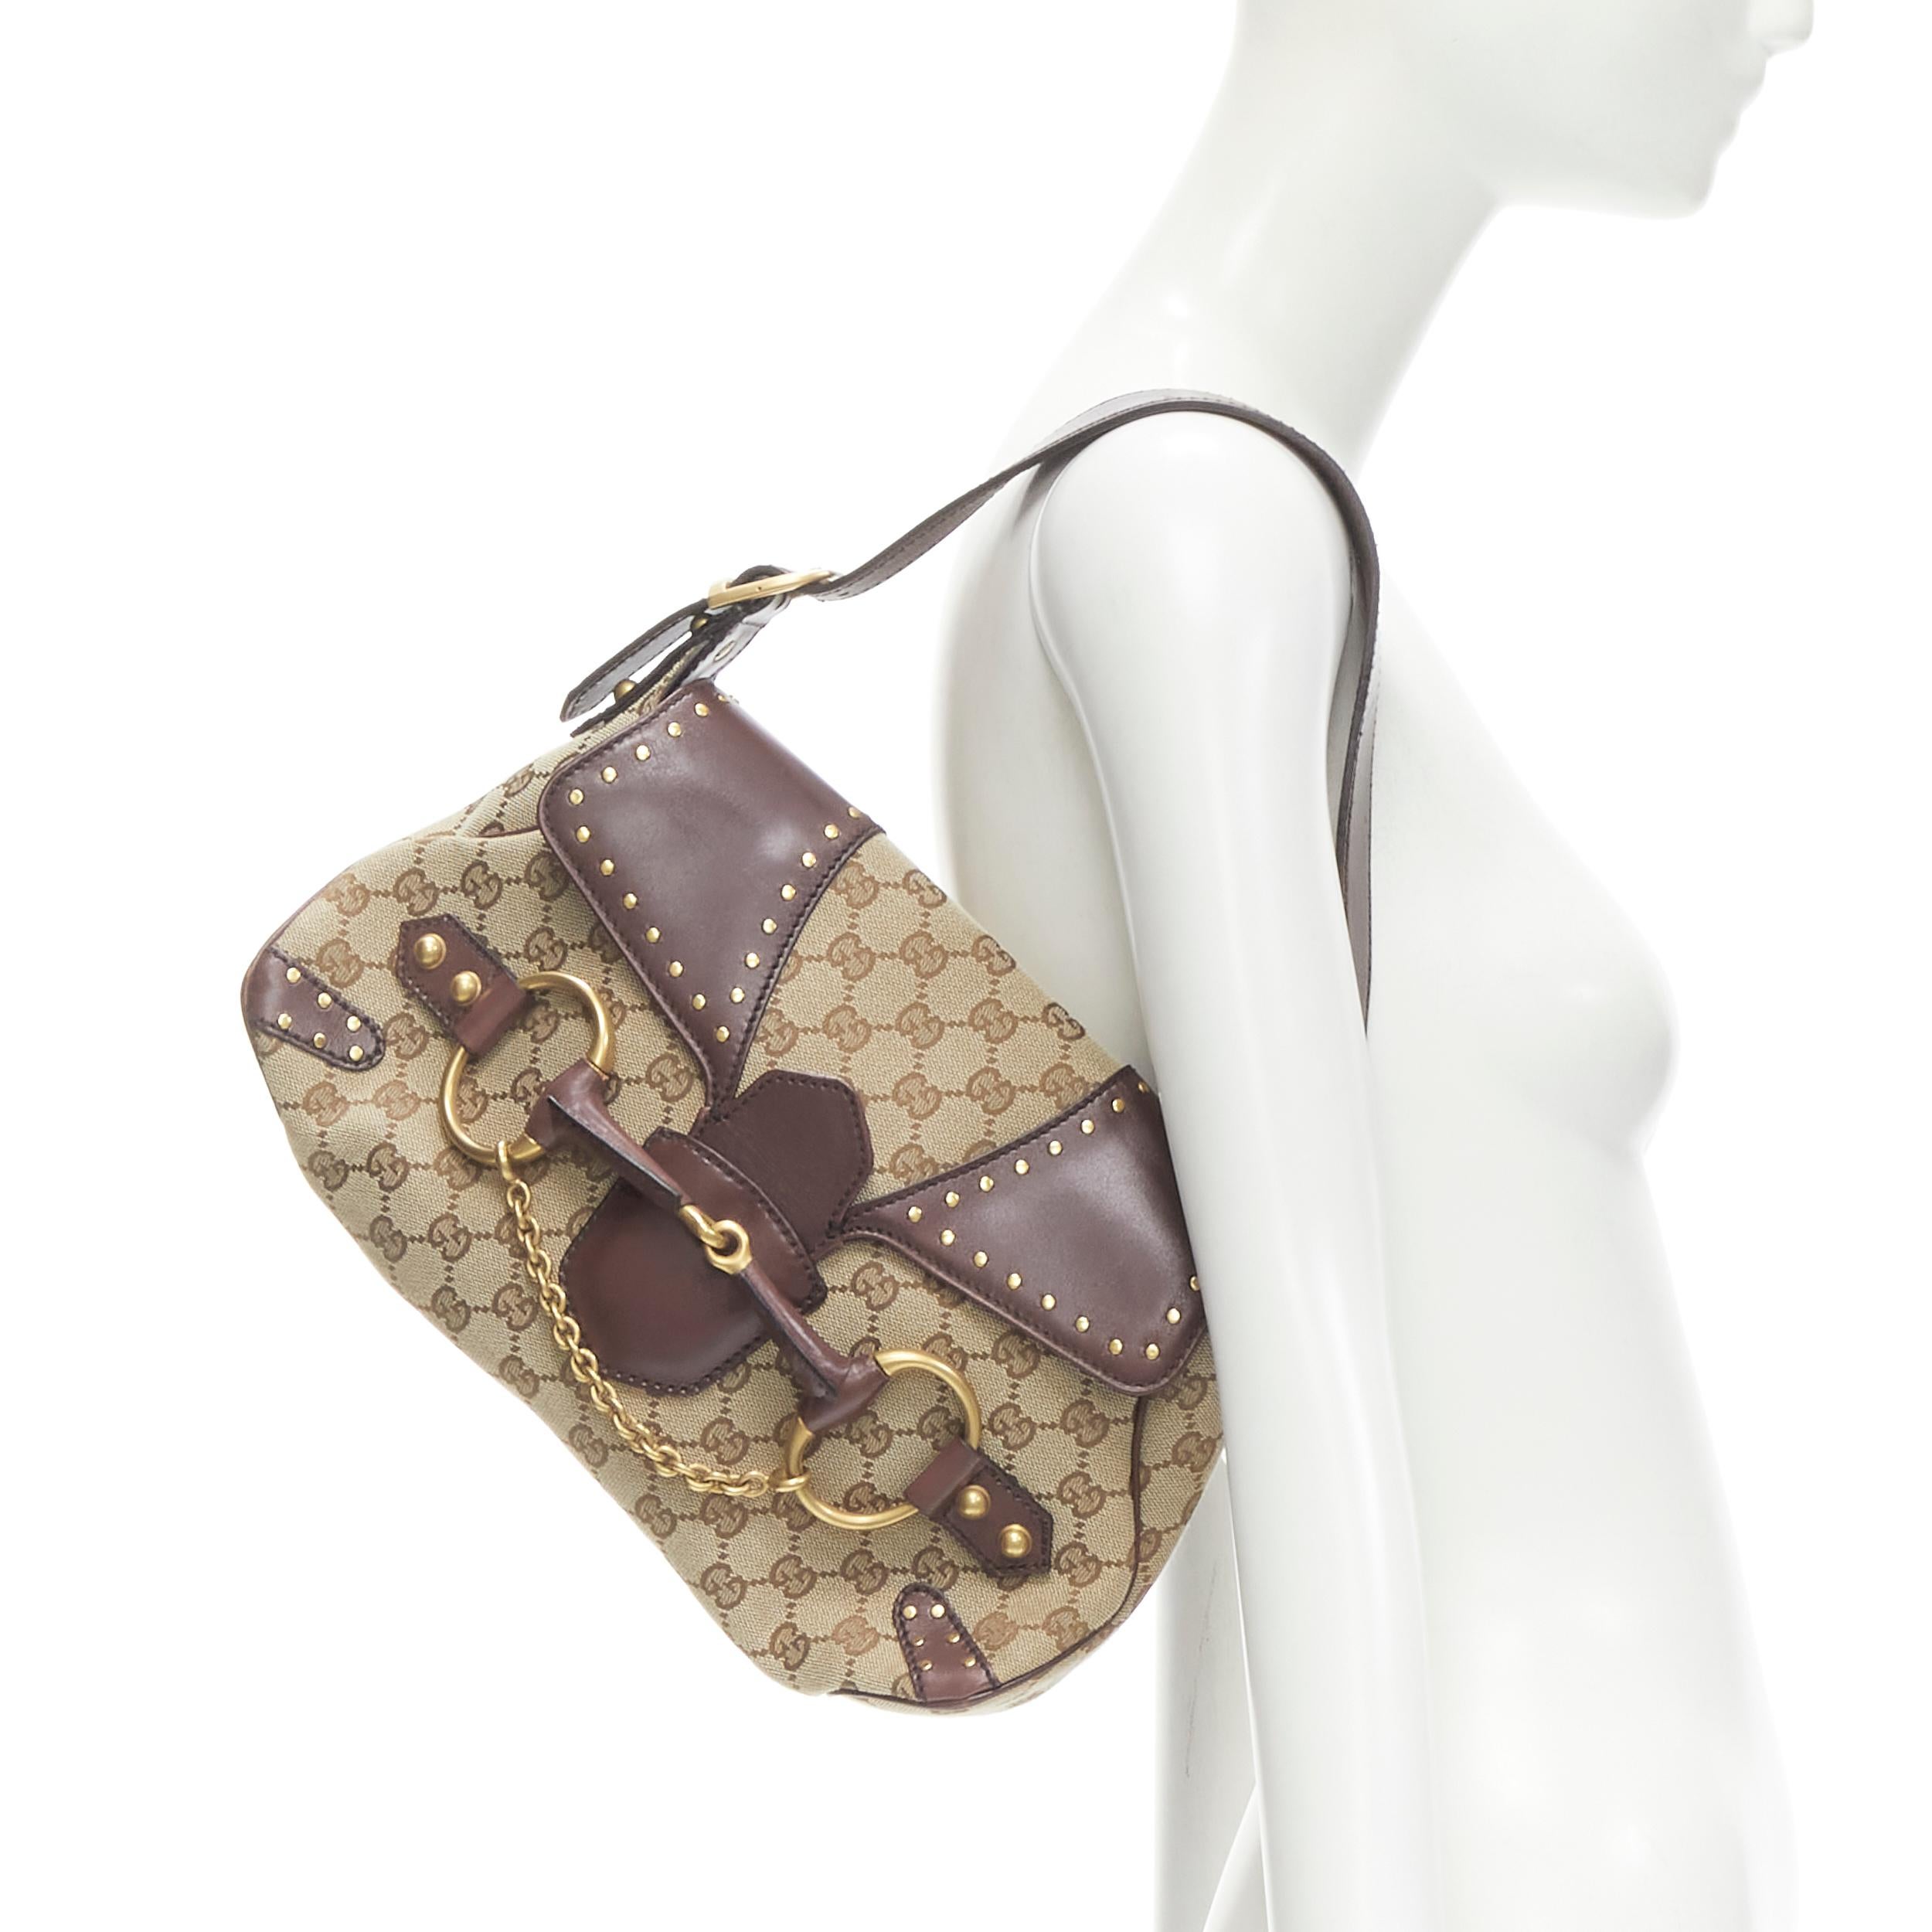 GUCCI 114915 burgundy leather GG monogram gold Horsebit chain flap shoulder bag
Brand: Gucci
Designer: Tom Ford
Model: 114915
Material: Canvas
Color: Brown
Pattern: Logomania
Extra Detail: Brown GG mongoram canvas upper with burgundy leather trim.